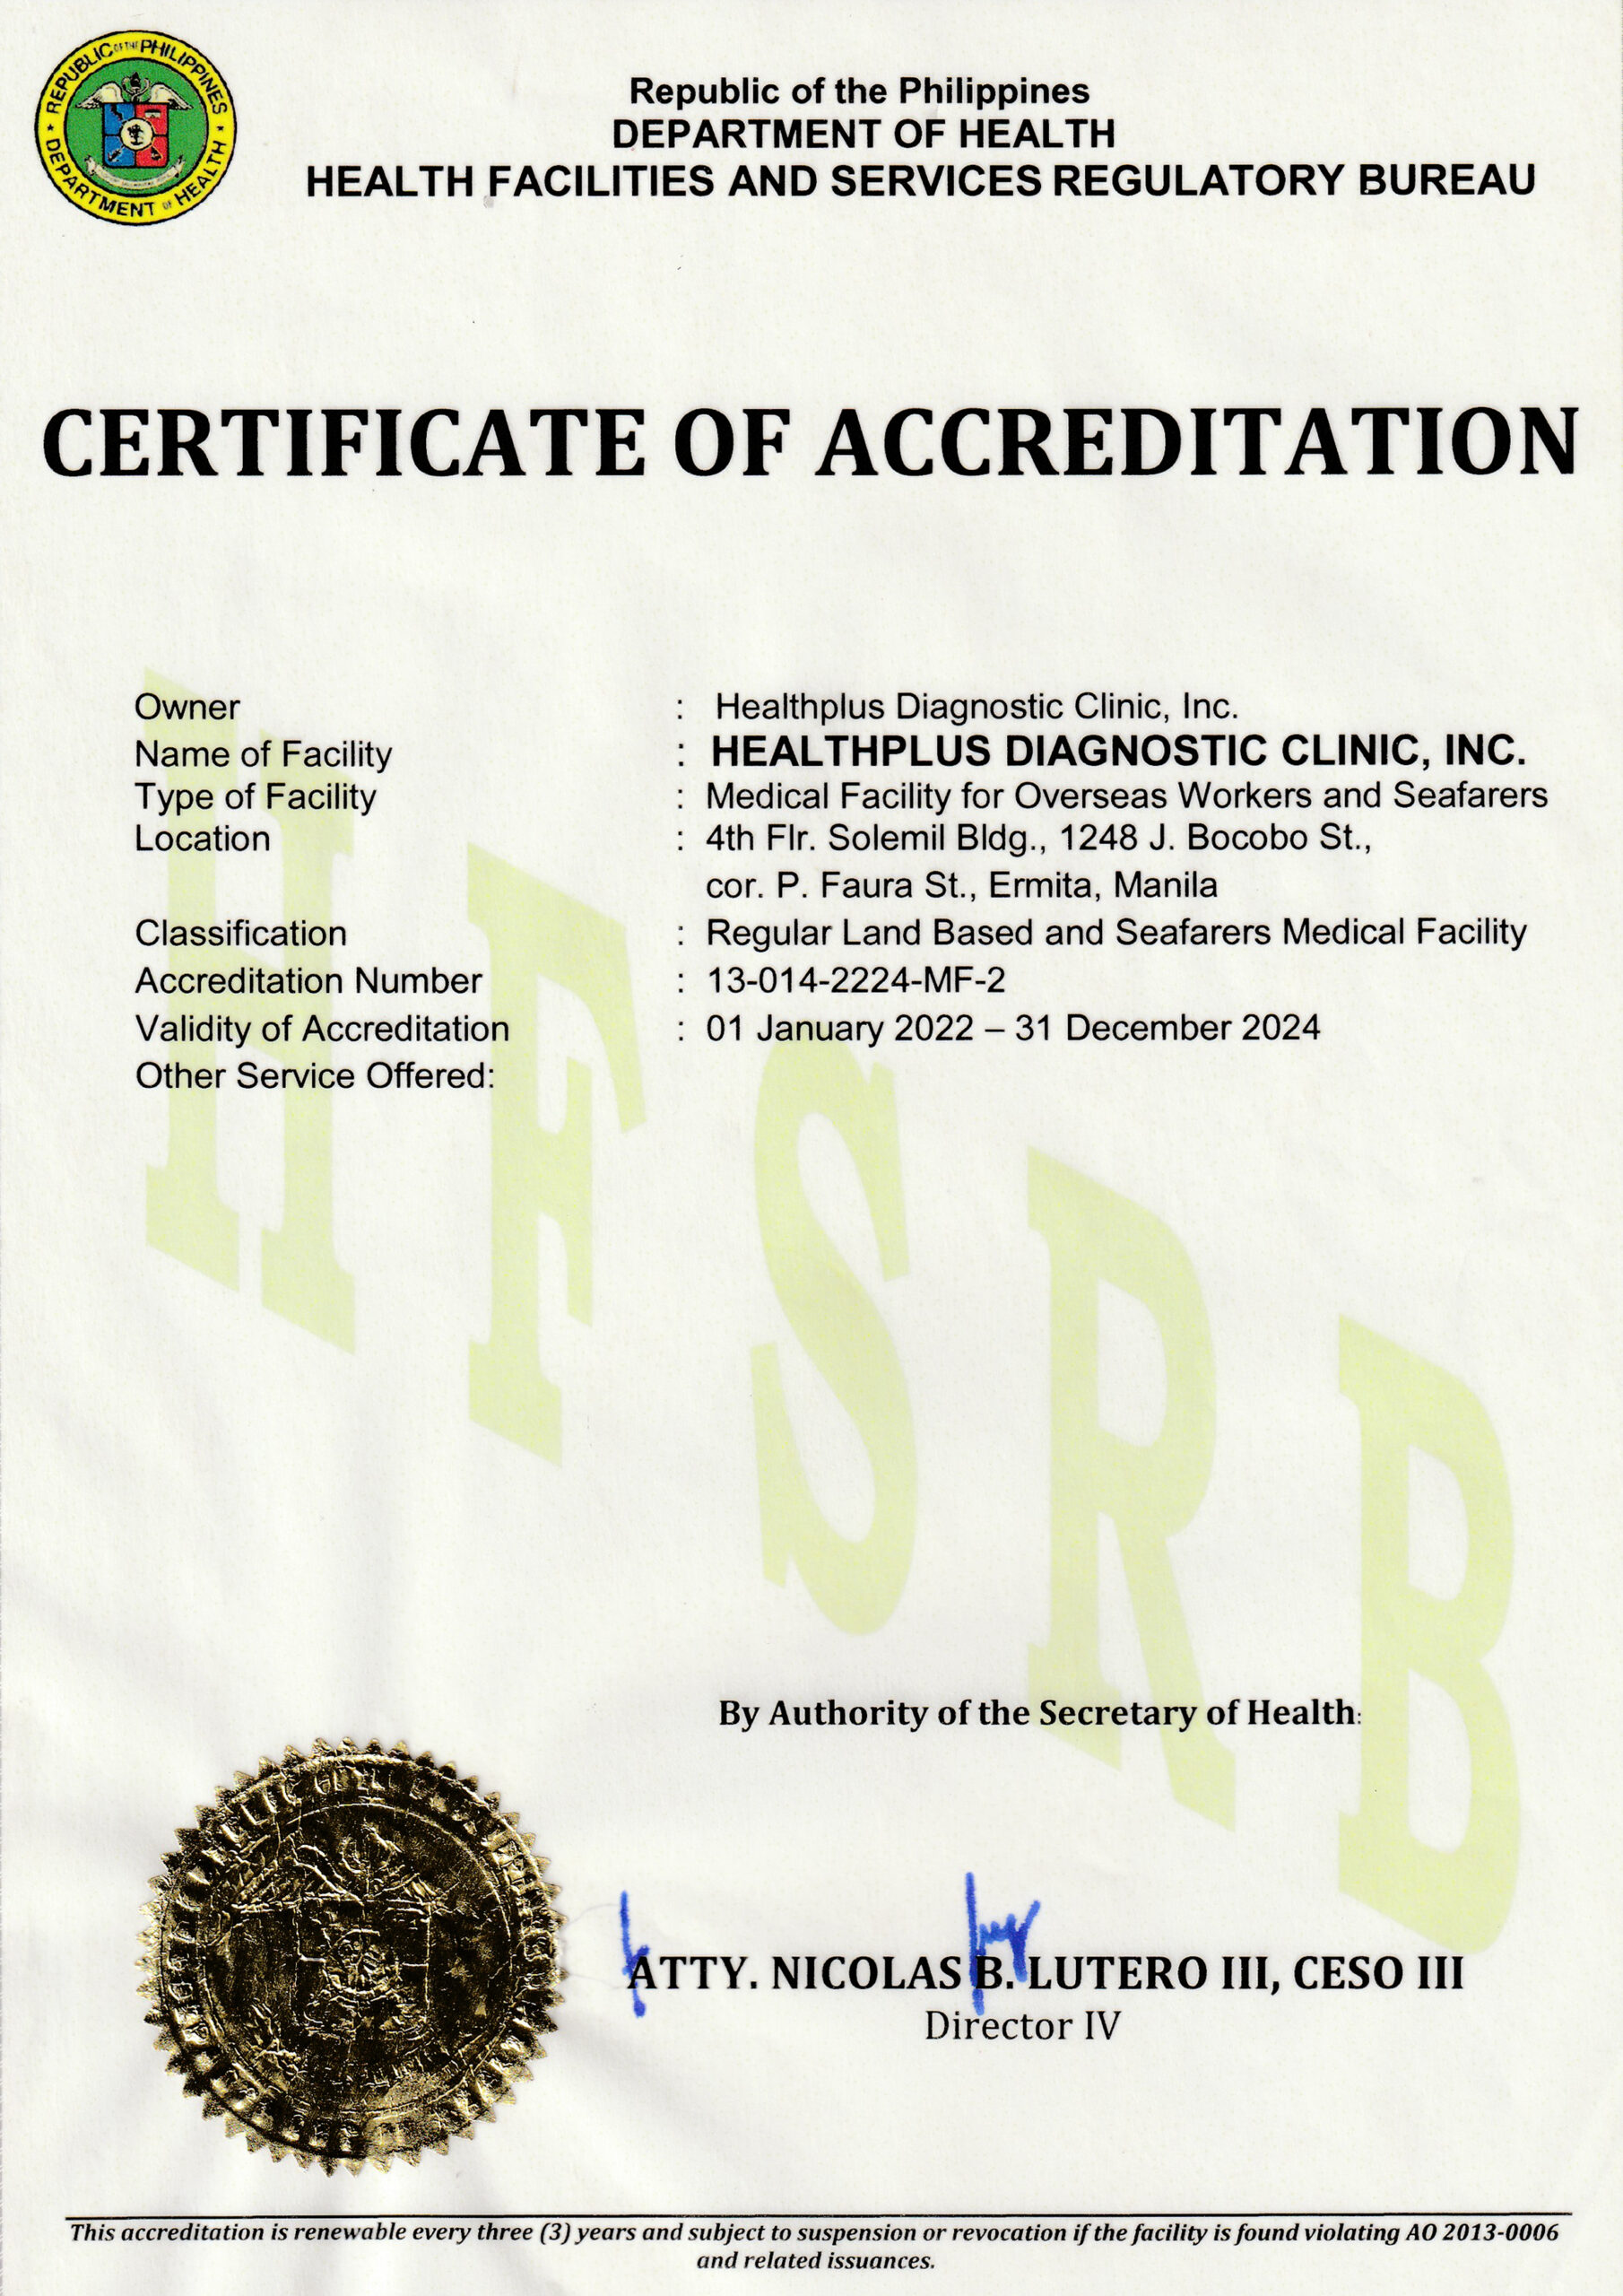 DOH Accreditation as a Medical Facility for Seafarers